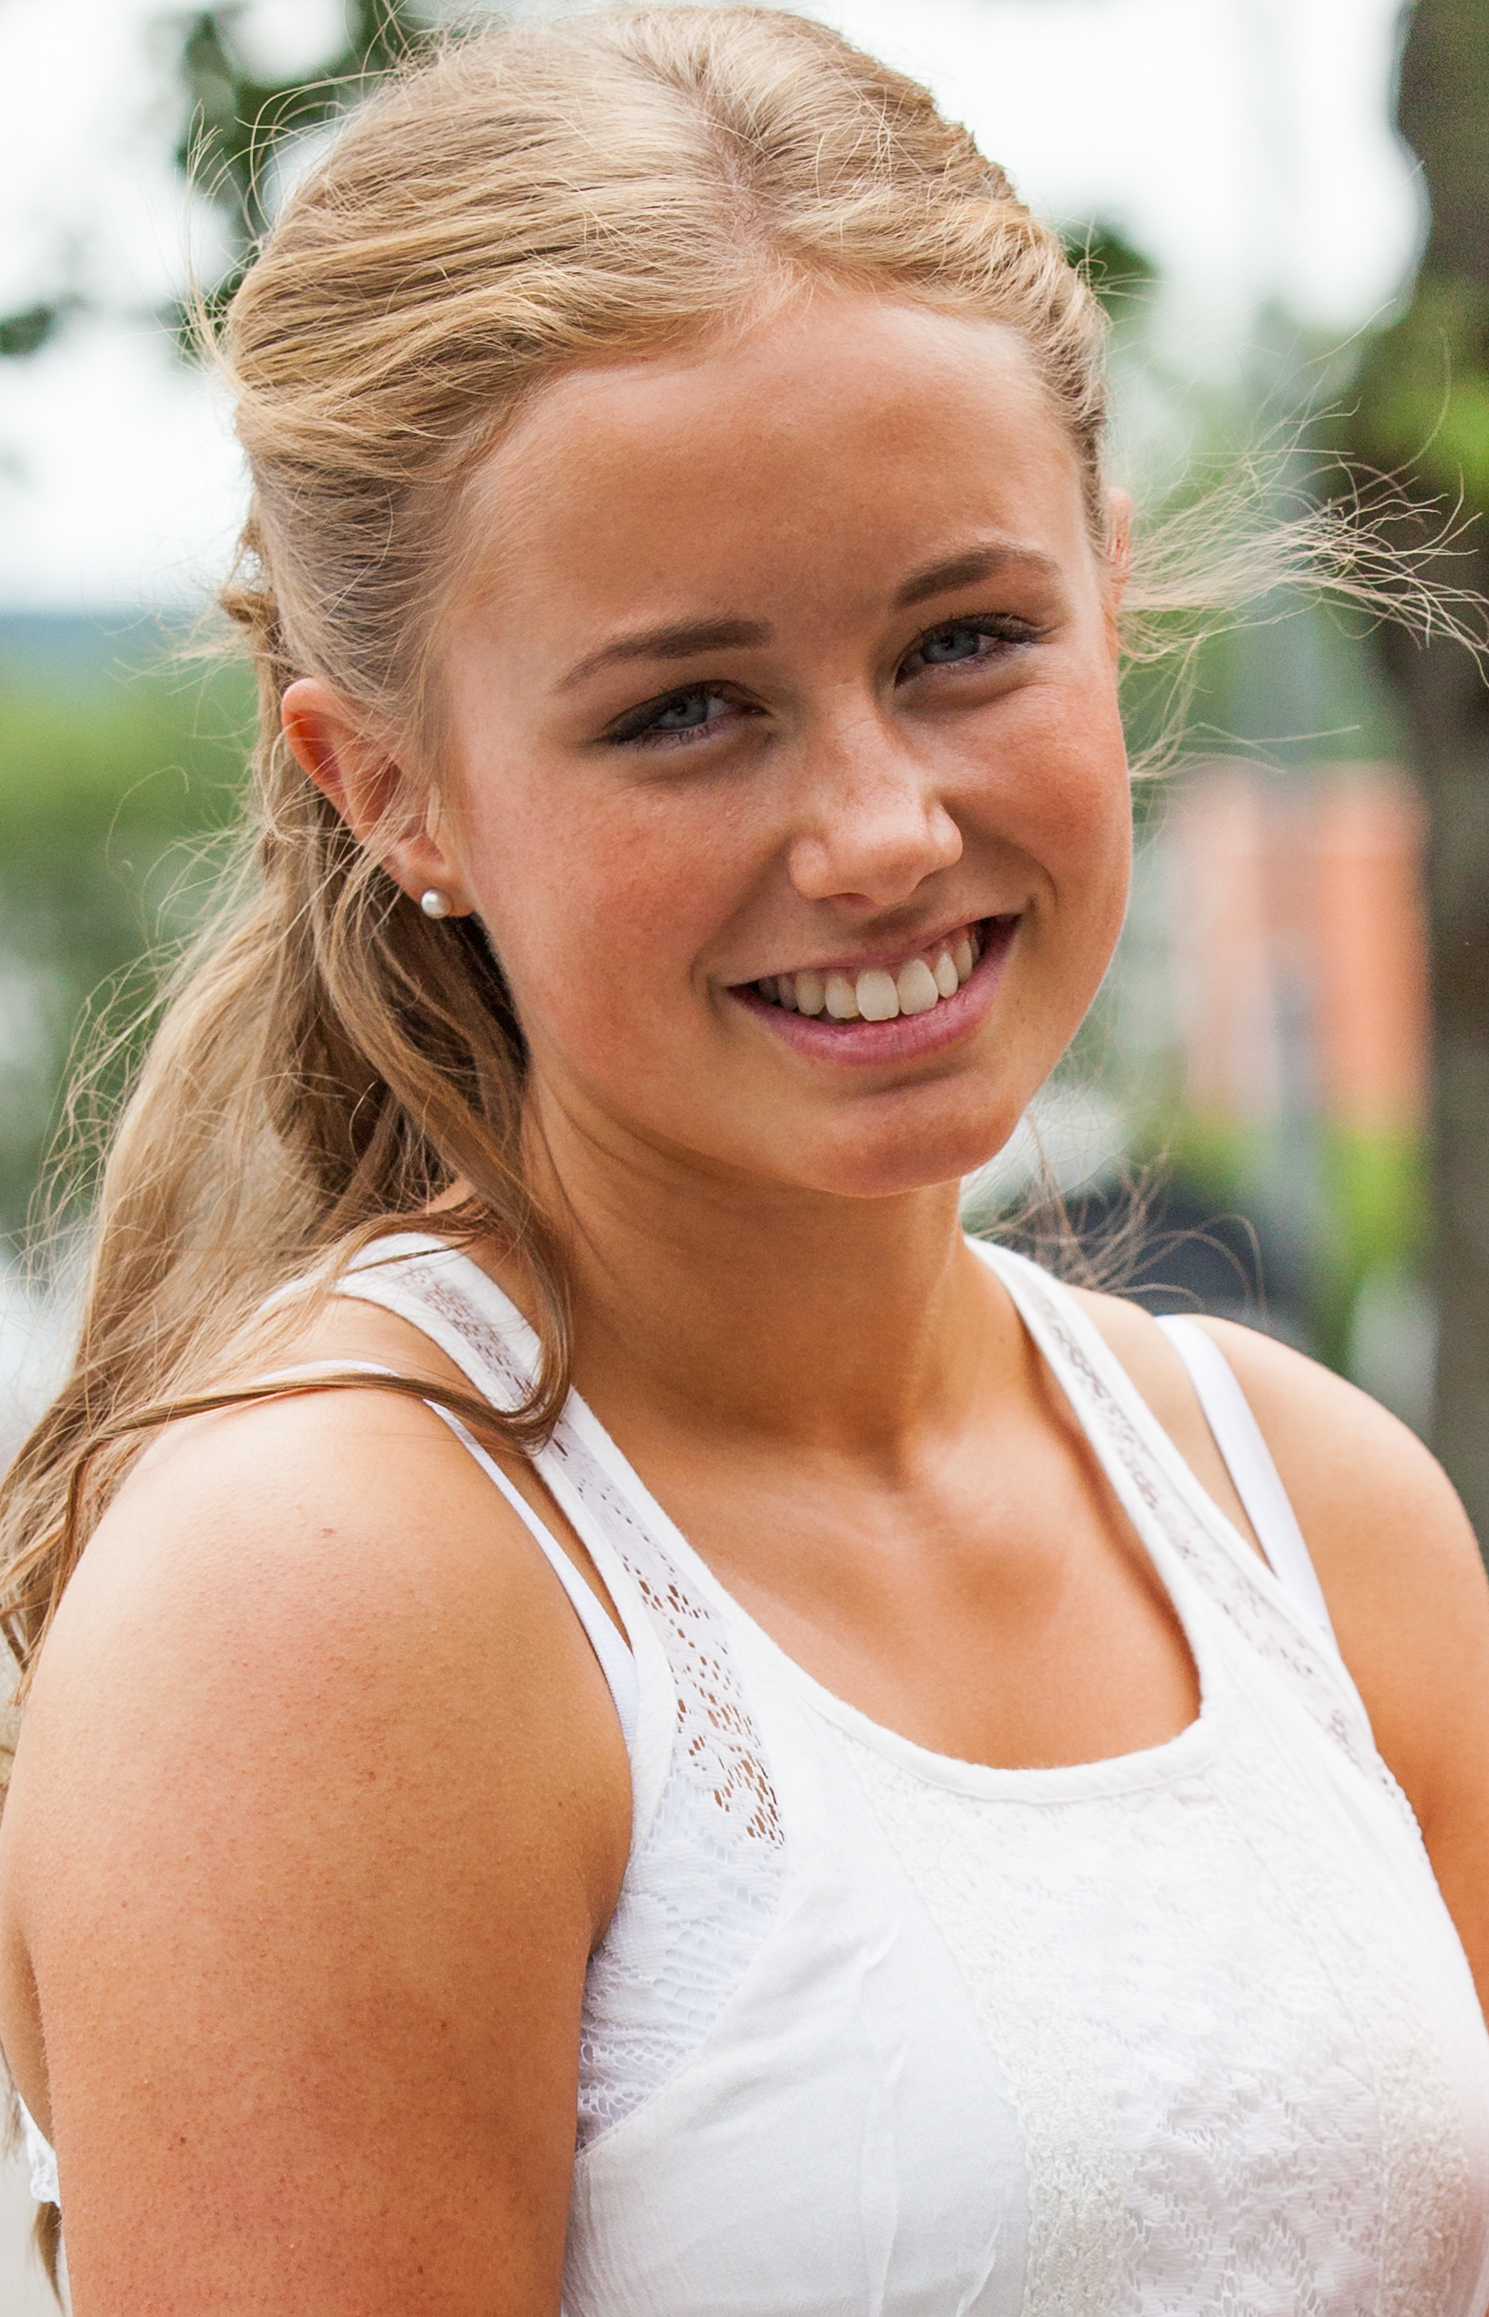 Photo of a blond beautiful girl photographed in Sigtuna, Sweden in June